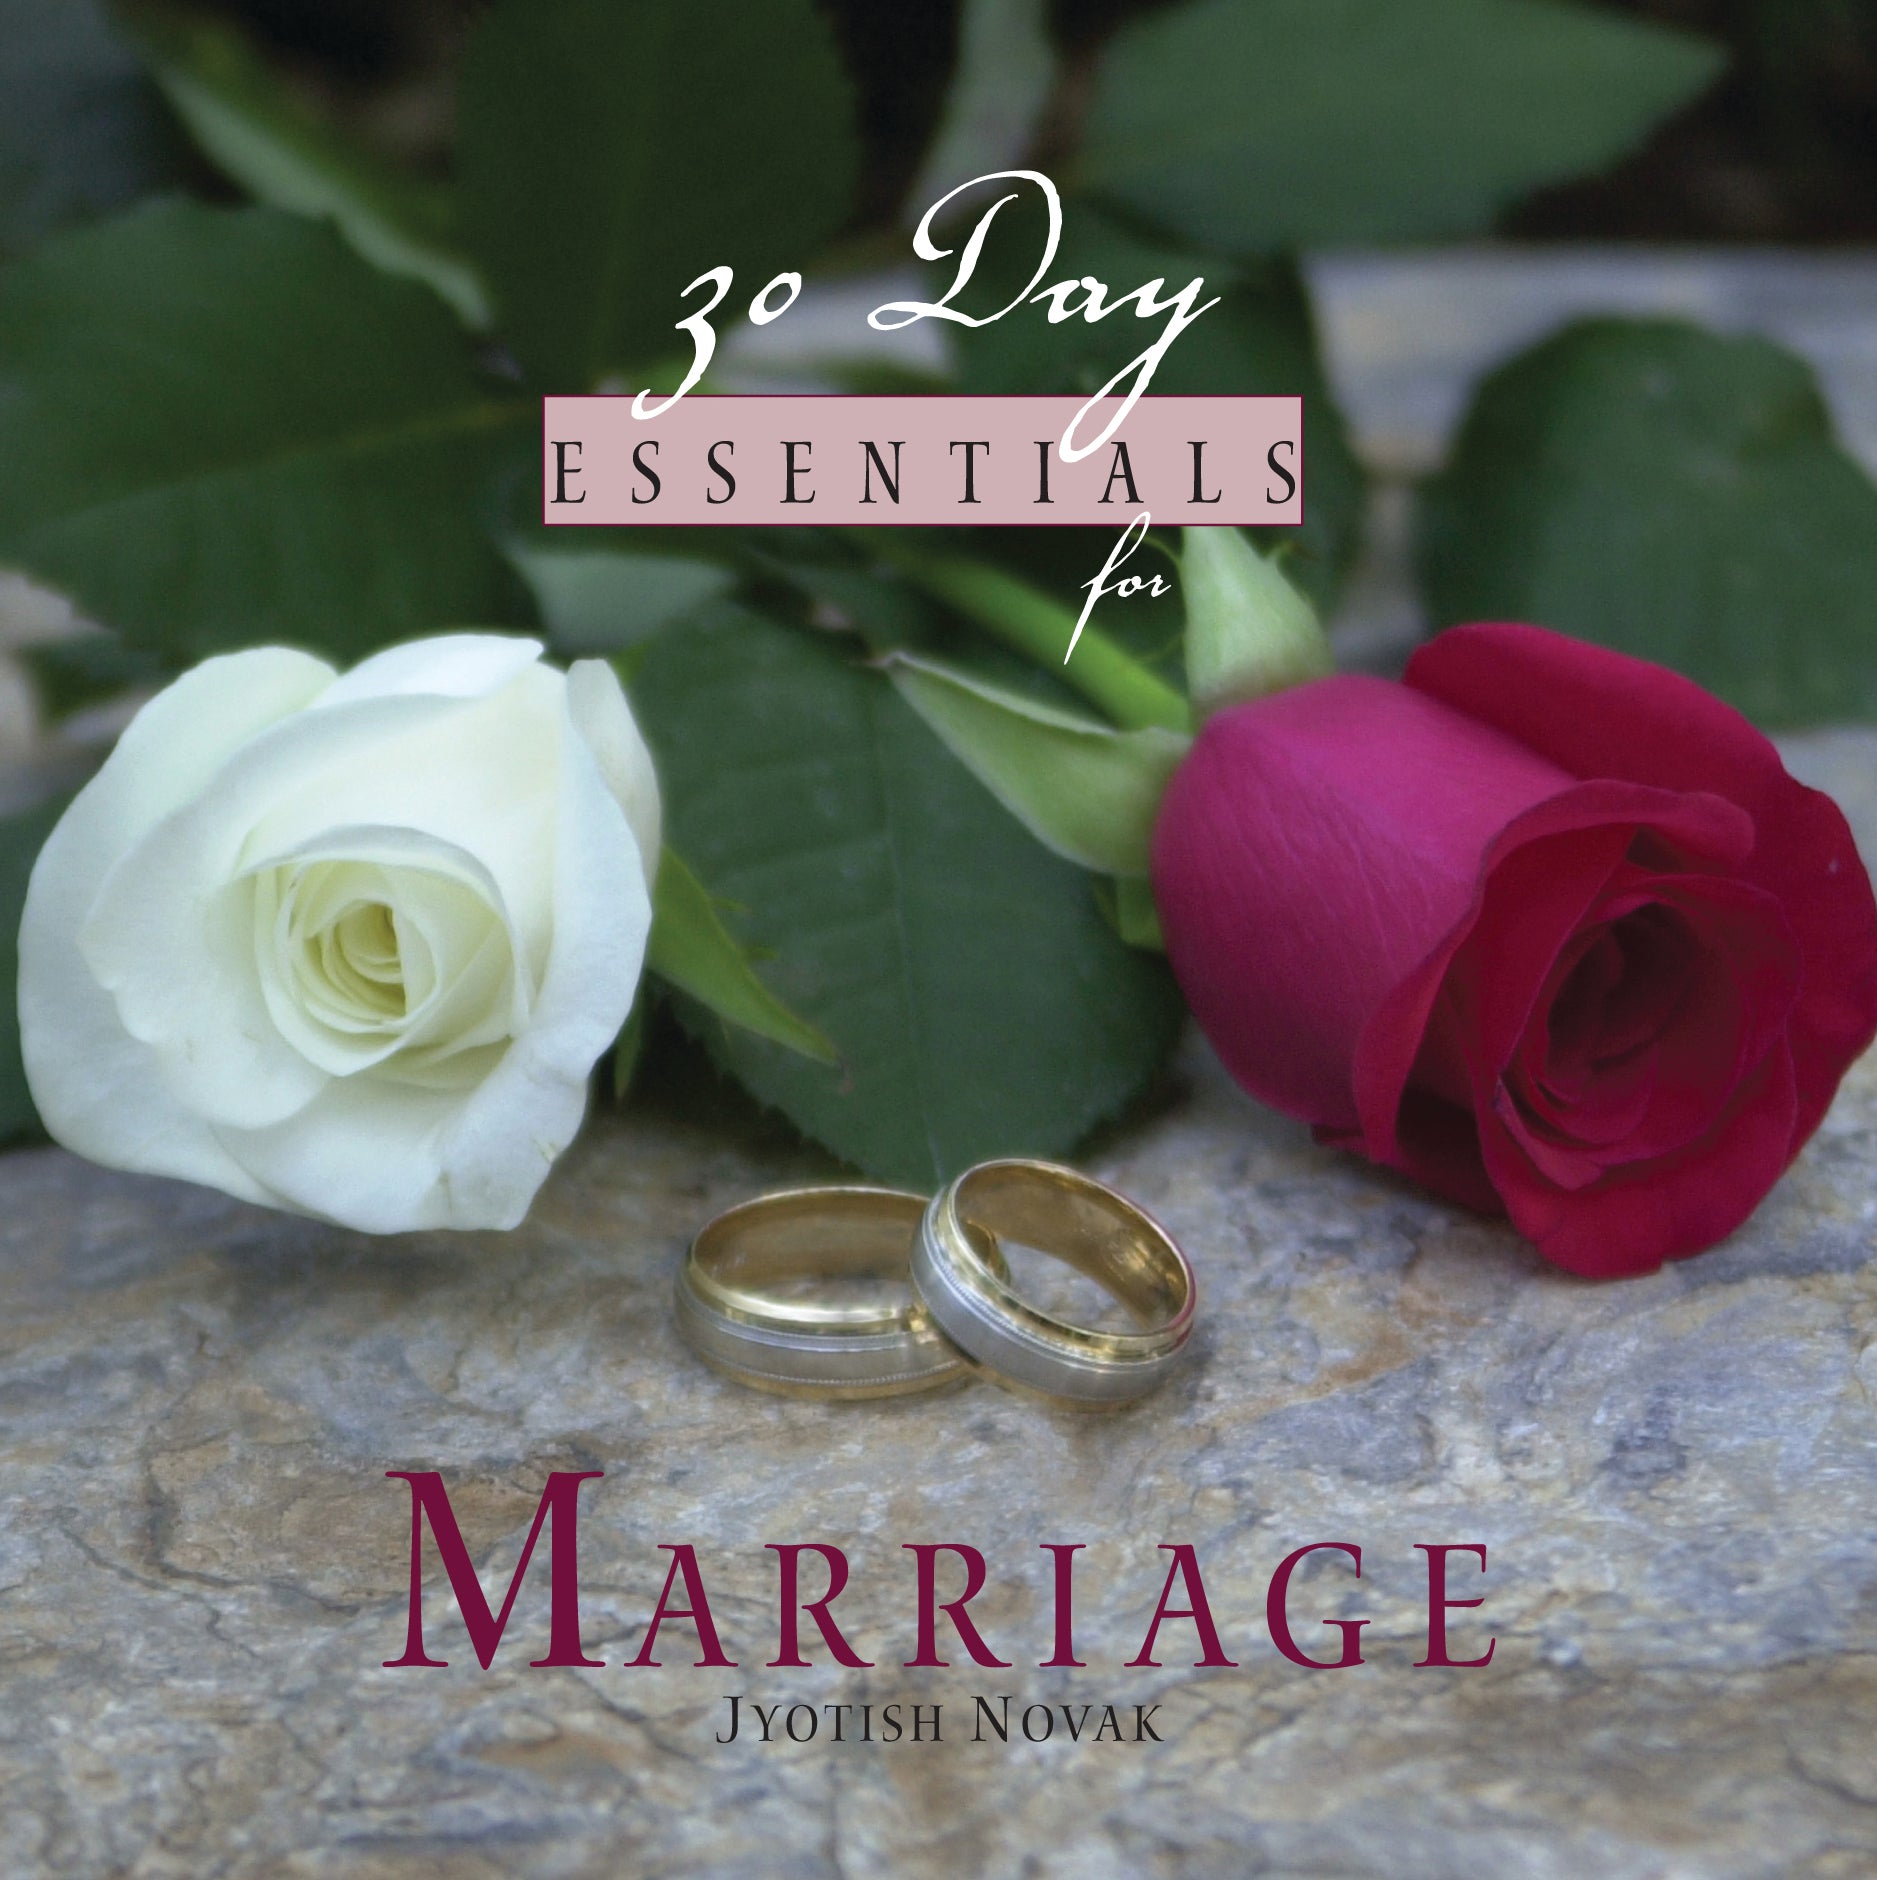 30-Day Essentials for Marriage